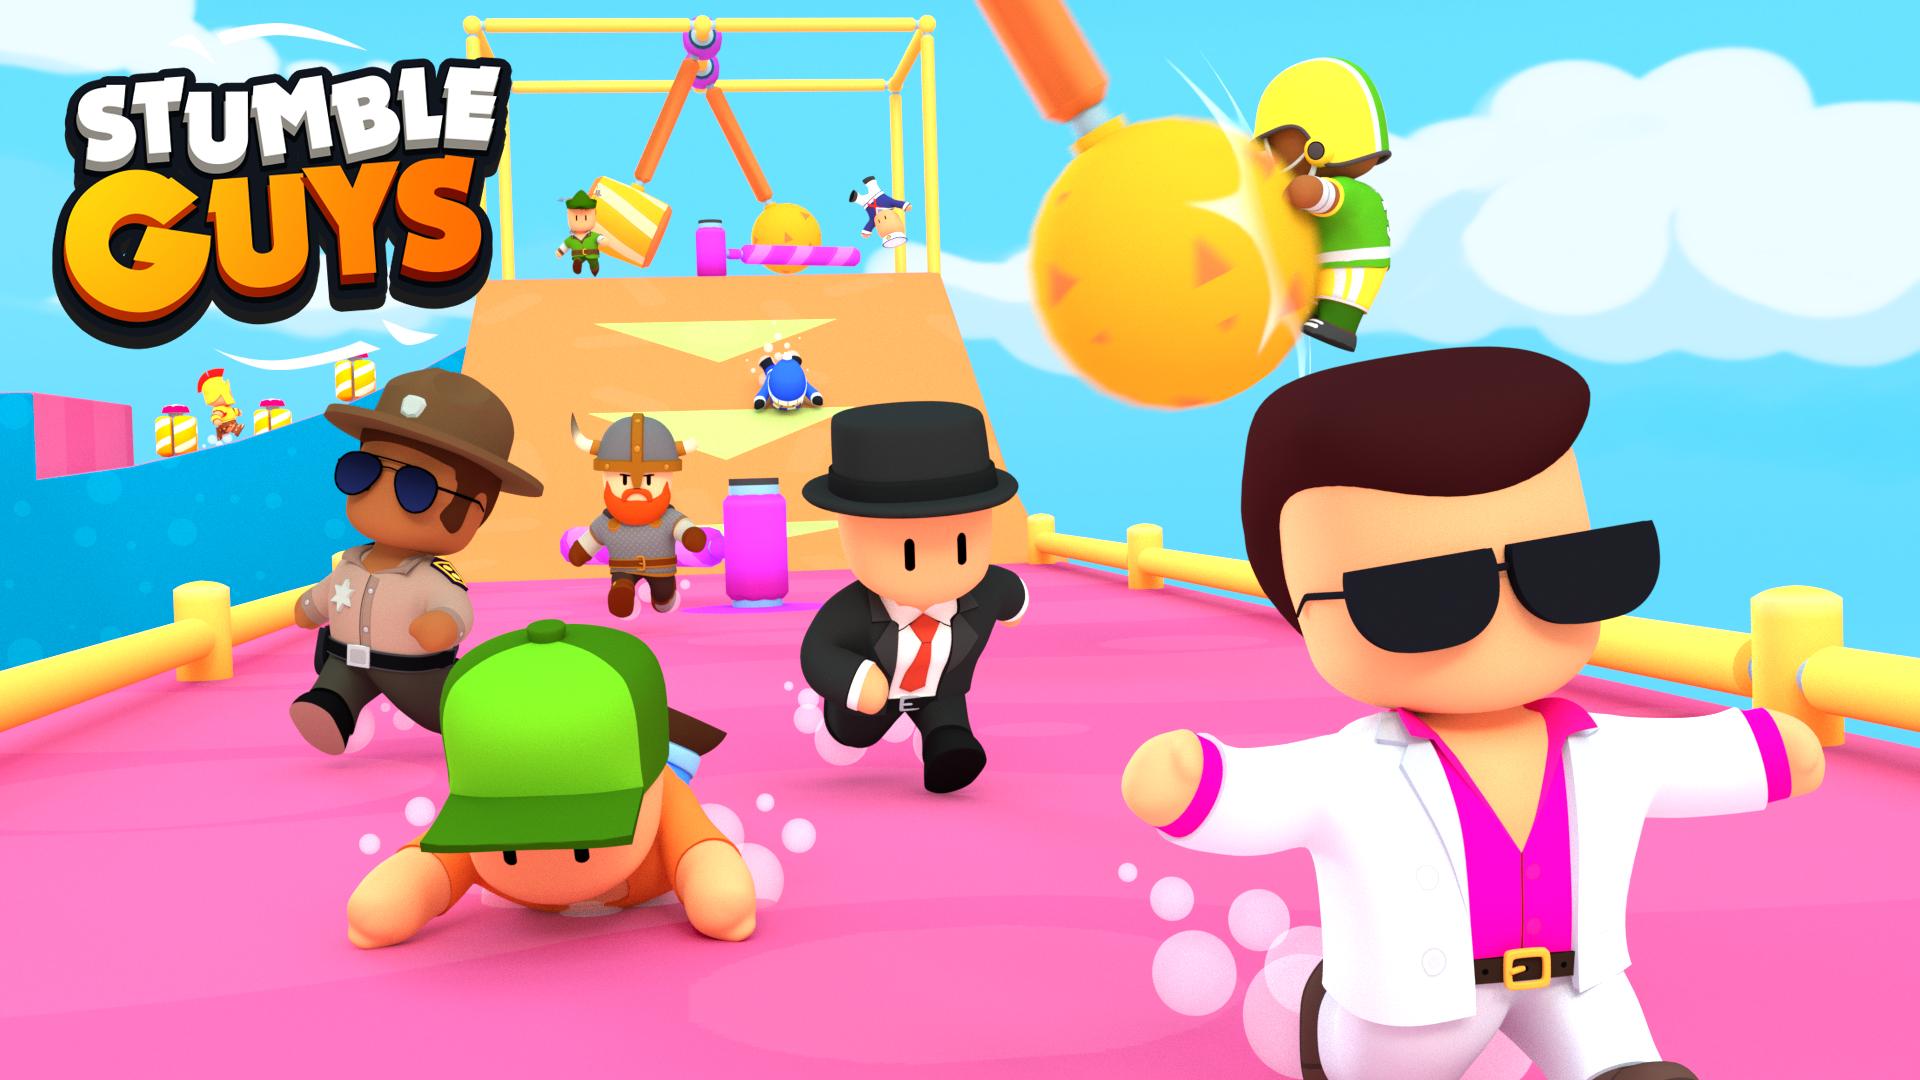 Stumble Guys Review: The Best Fall Guys Clone for Mobile - Curious Steve